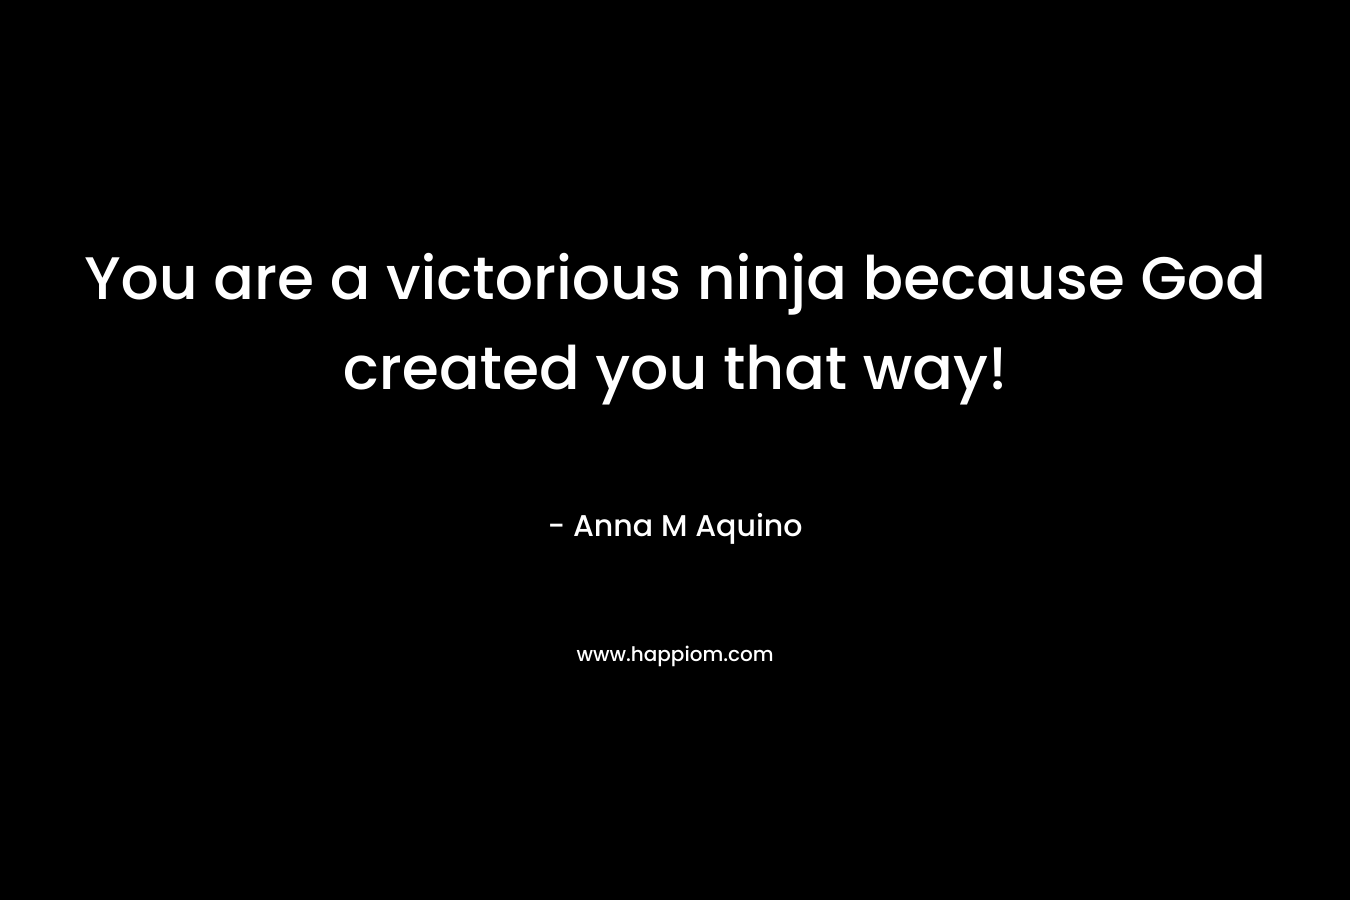 You are a victorious ninja because God created you that way! – Anna M Aquino